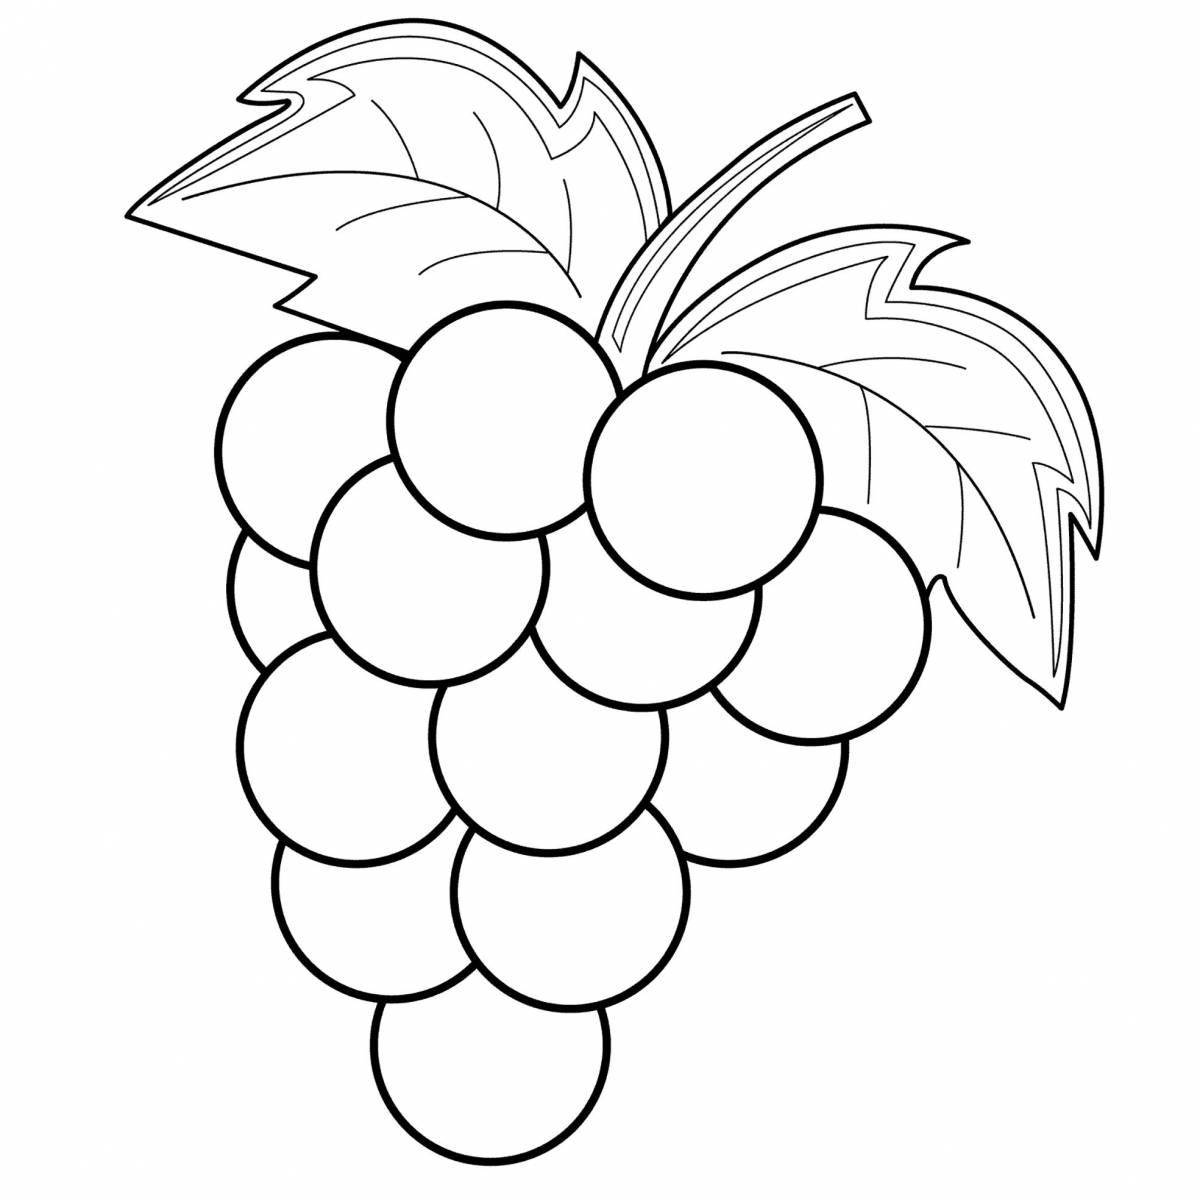 Coloring book rare berries and fruits